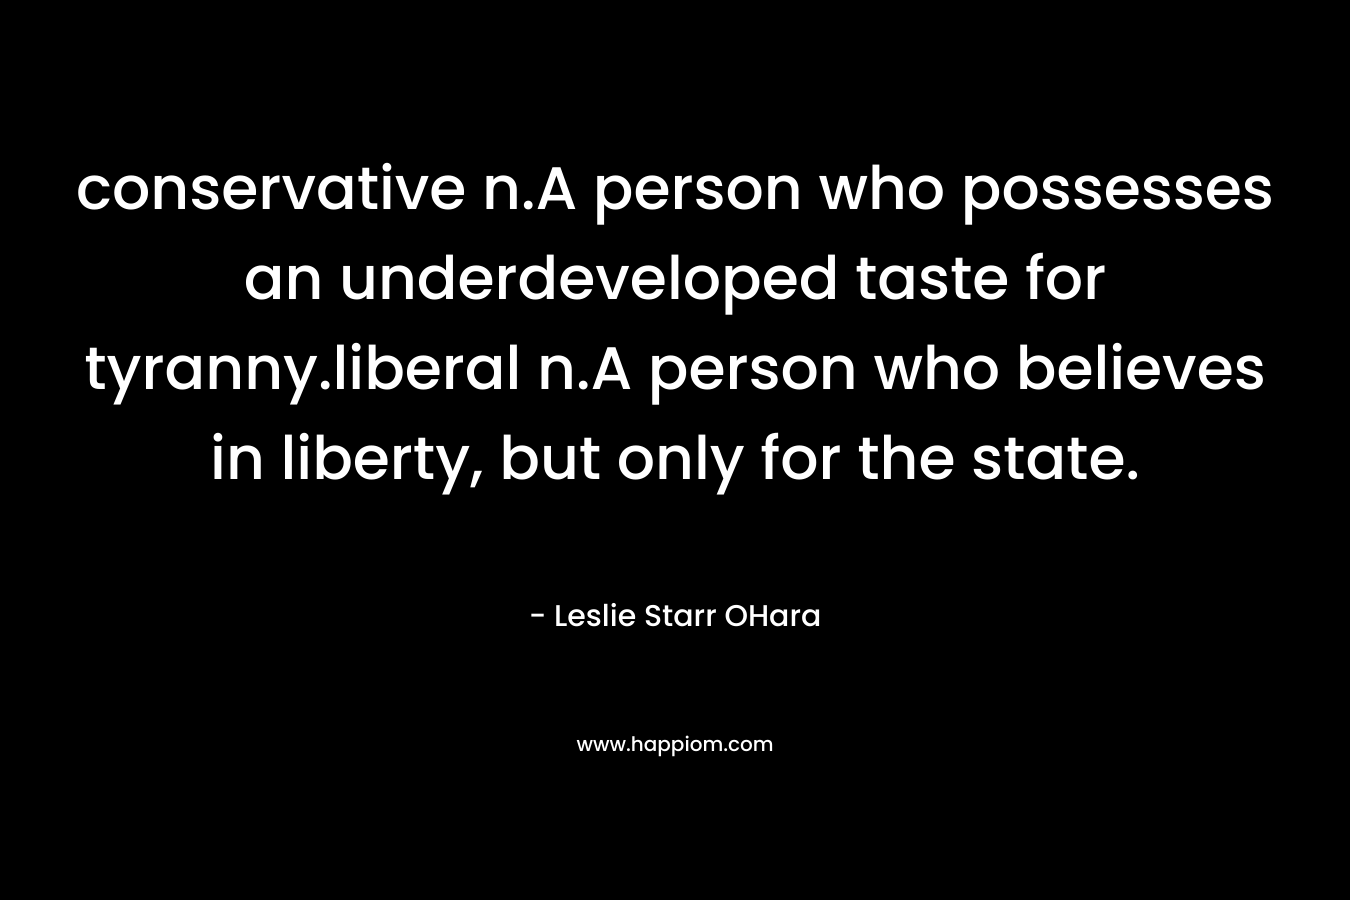 conservative n.A person who possesses an underdeveloped taste for tyranny.liberal n.A person who believes in liberty, but only for the state. – Leslie Starr OHara